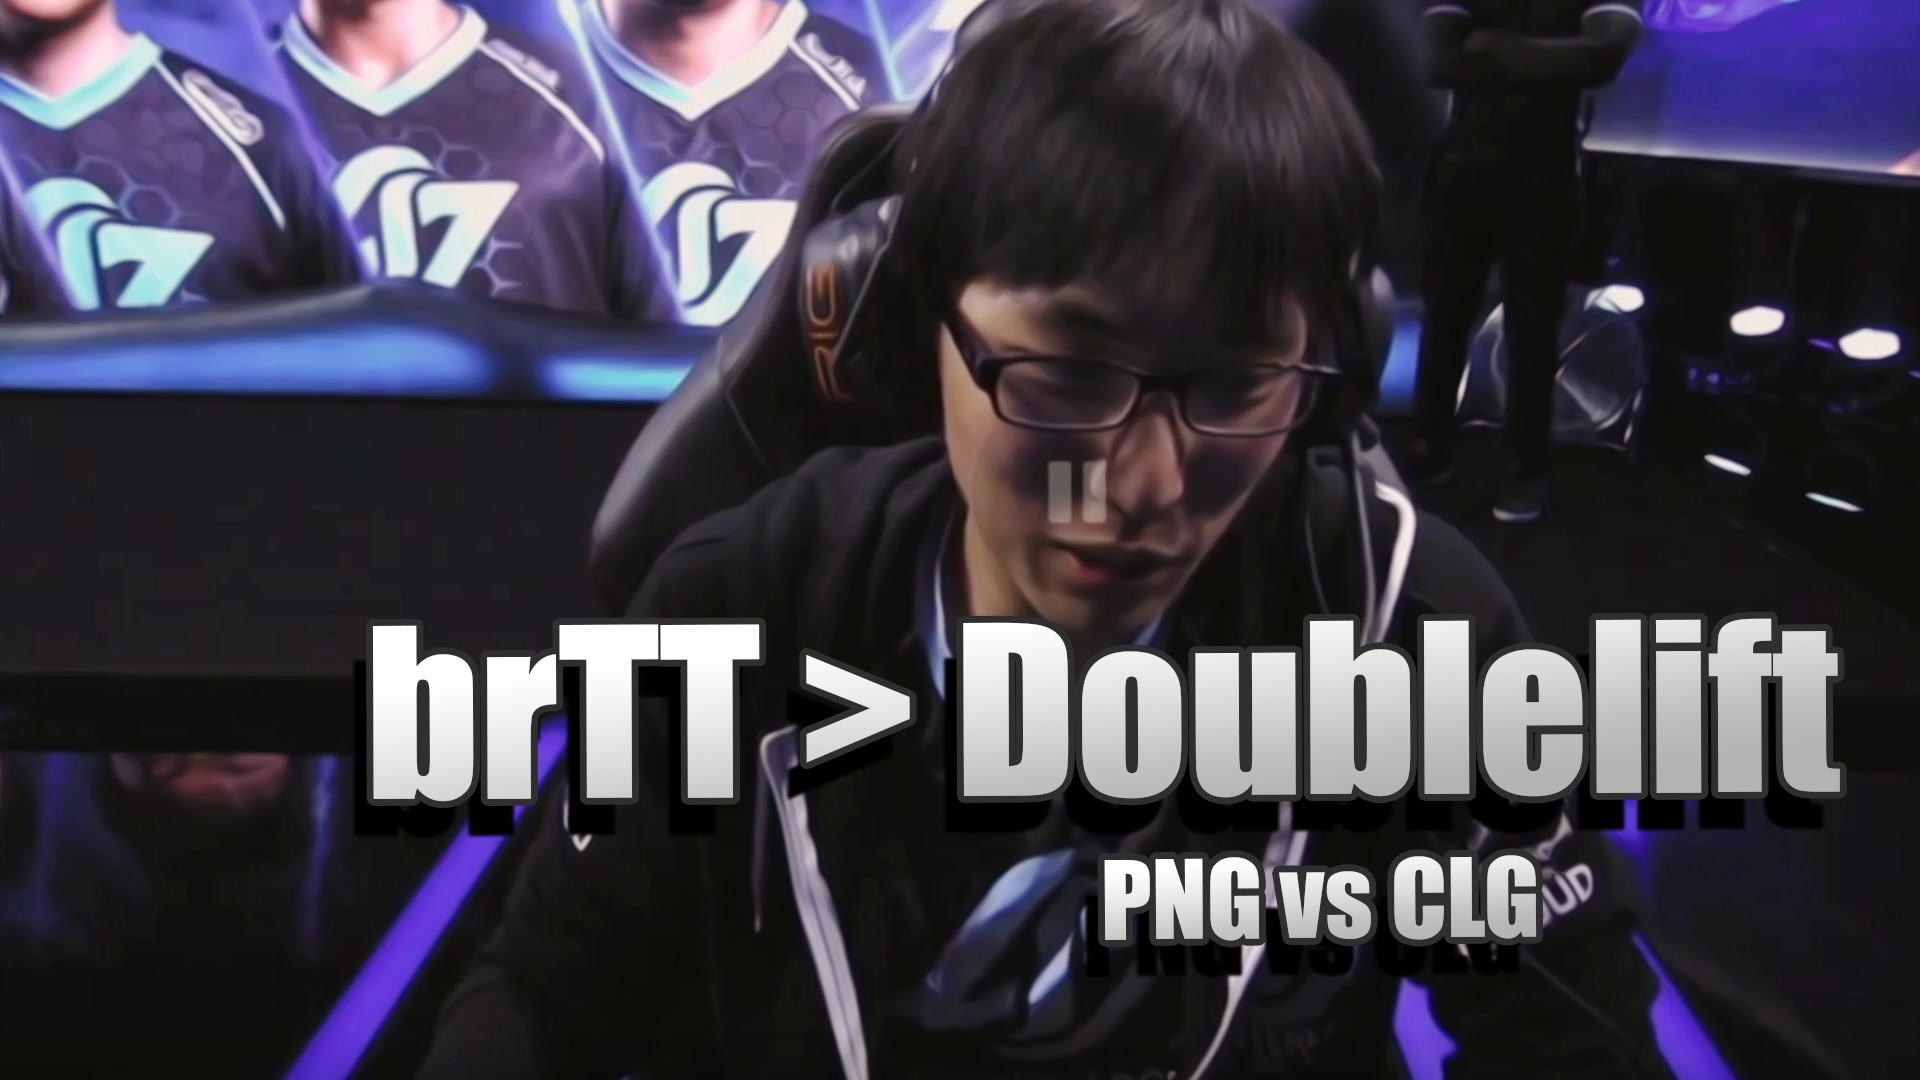 1920x1080 Doublelift about reading messages saying "Pain Gaming brTT is better than  Doublelift" - PNG vs CLG - YouTube